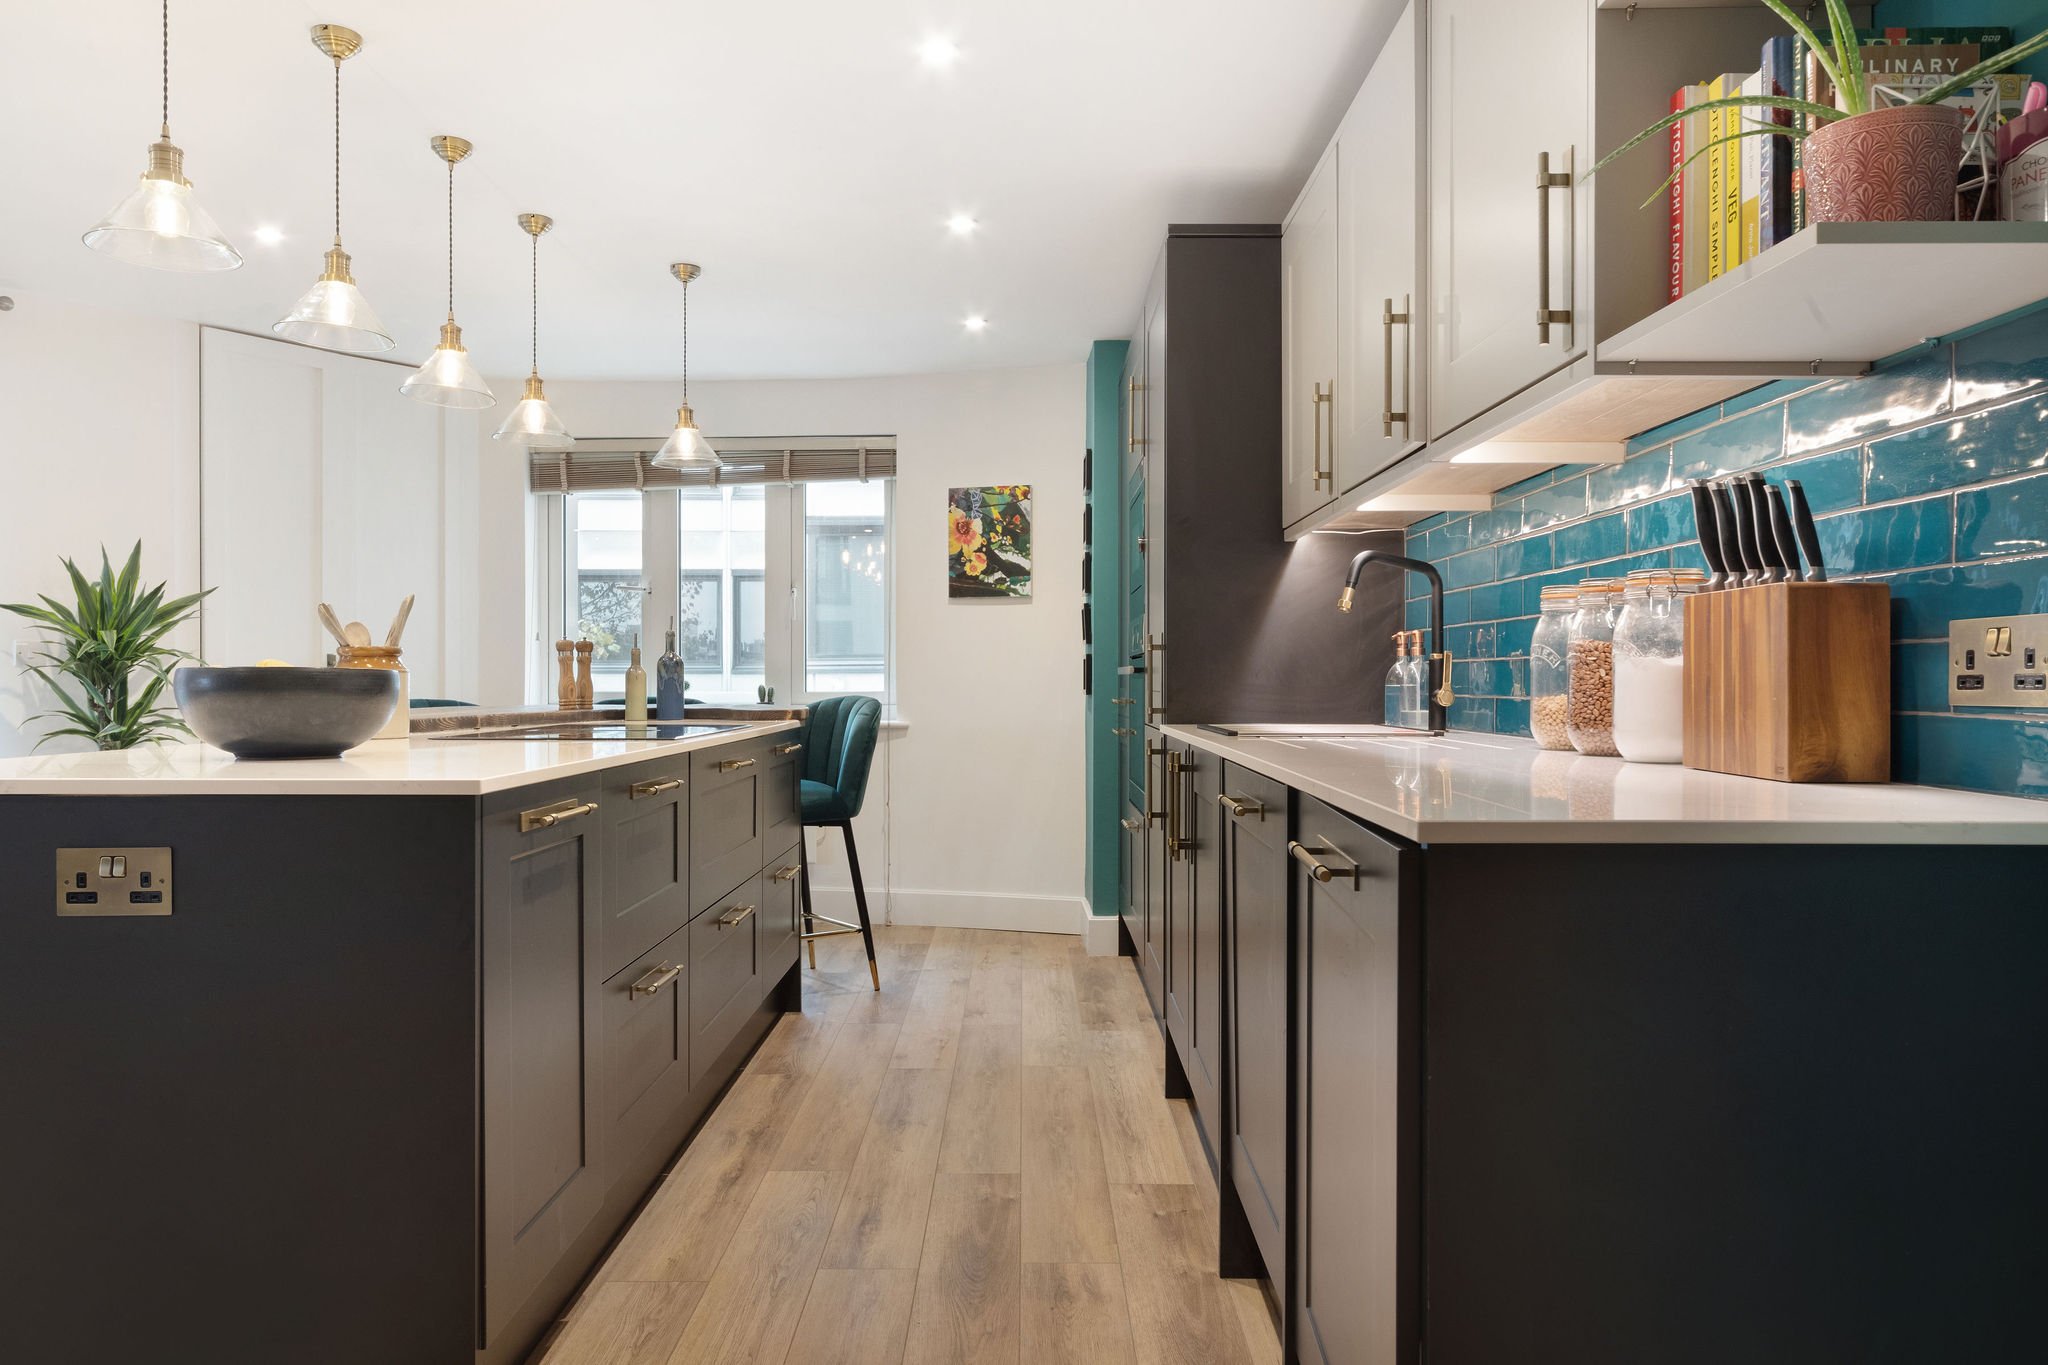 Putney Project Teal Orsetto Interiors Kitchen design.jpg